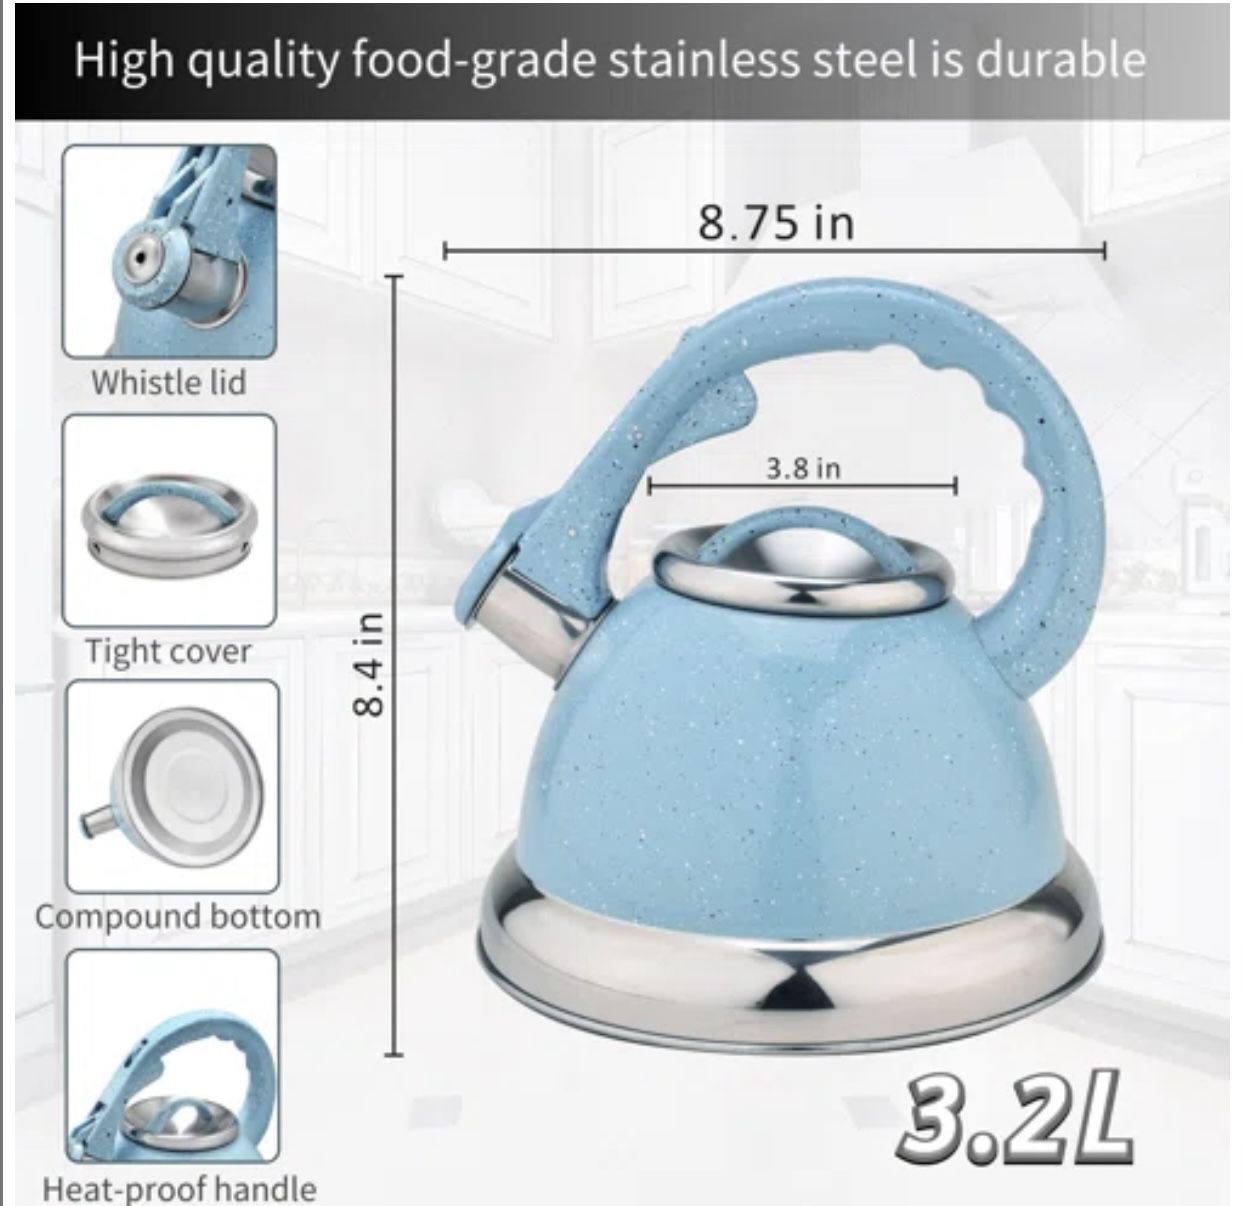 Sky Blue ARC 3.2 Quarts Stainless Steel Whistling Stovetop Tea Kettle  High quality}: This tea kettle is made of professional anti-rust coating and st